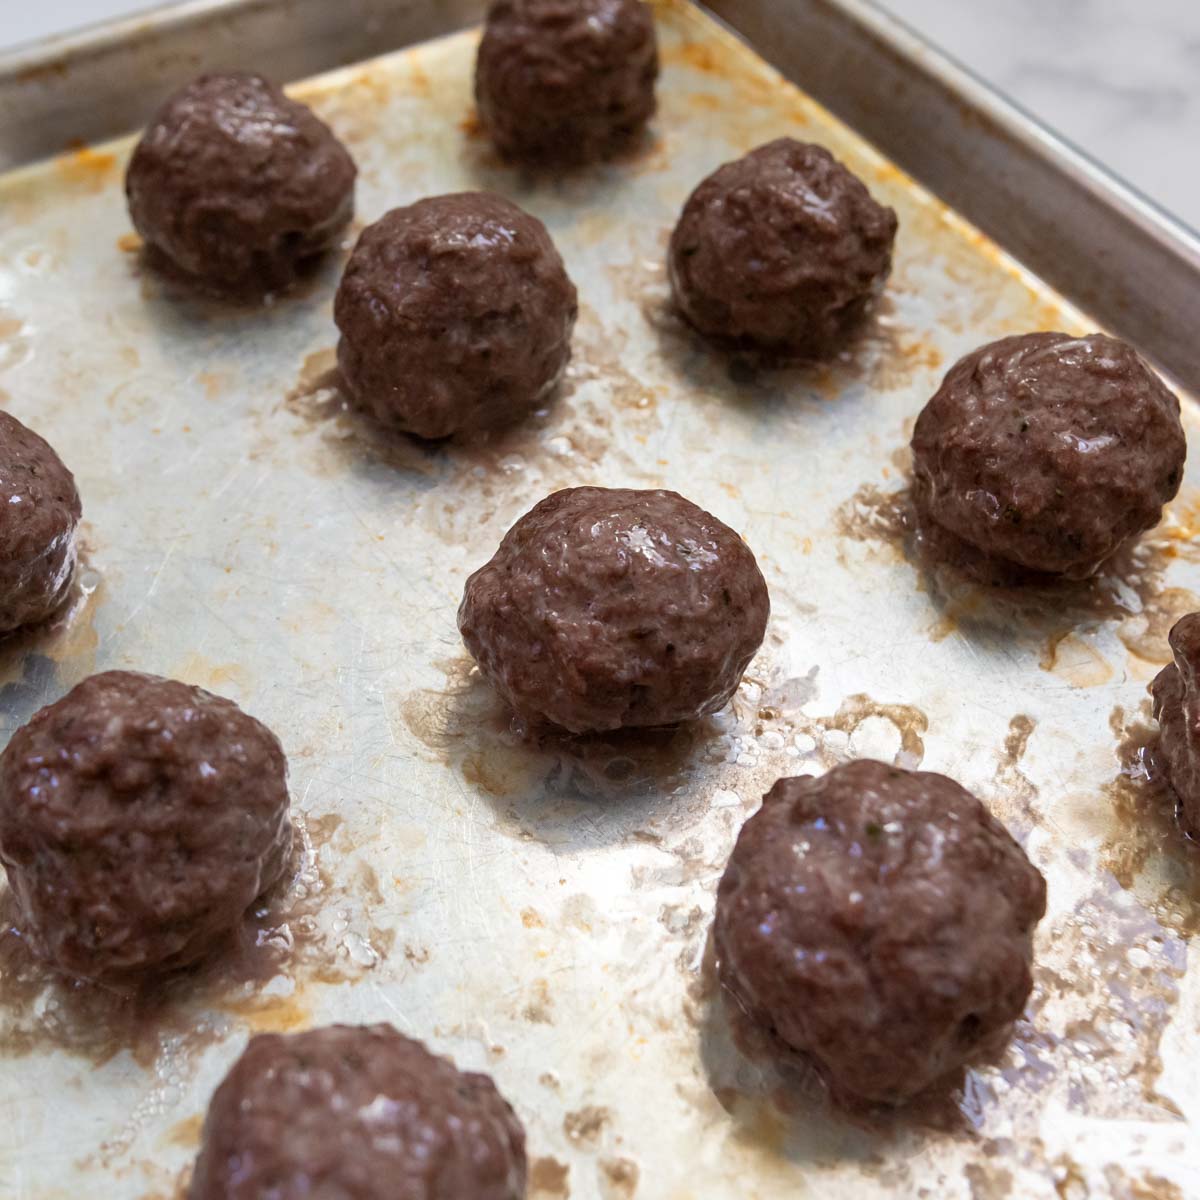 meatballs after browning in an oven.